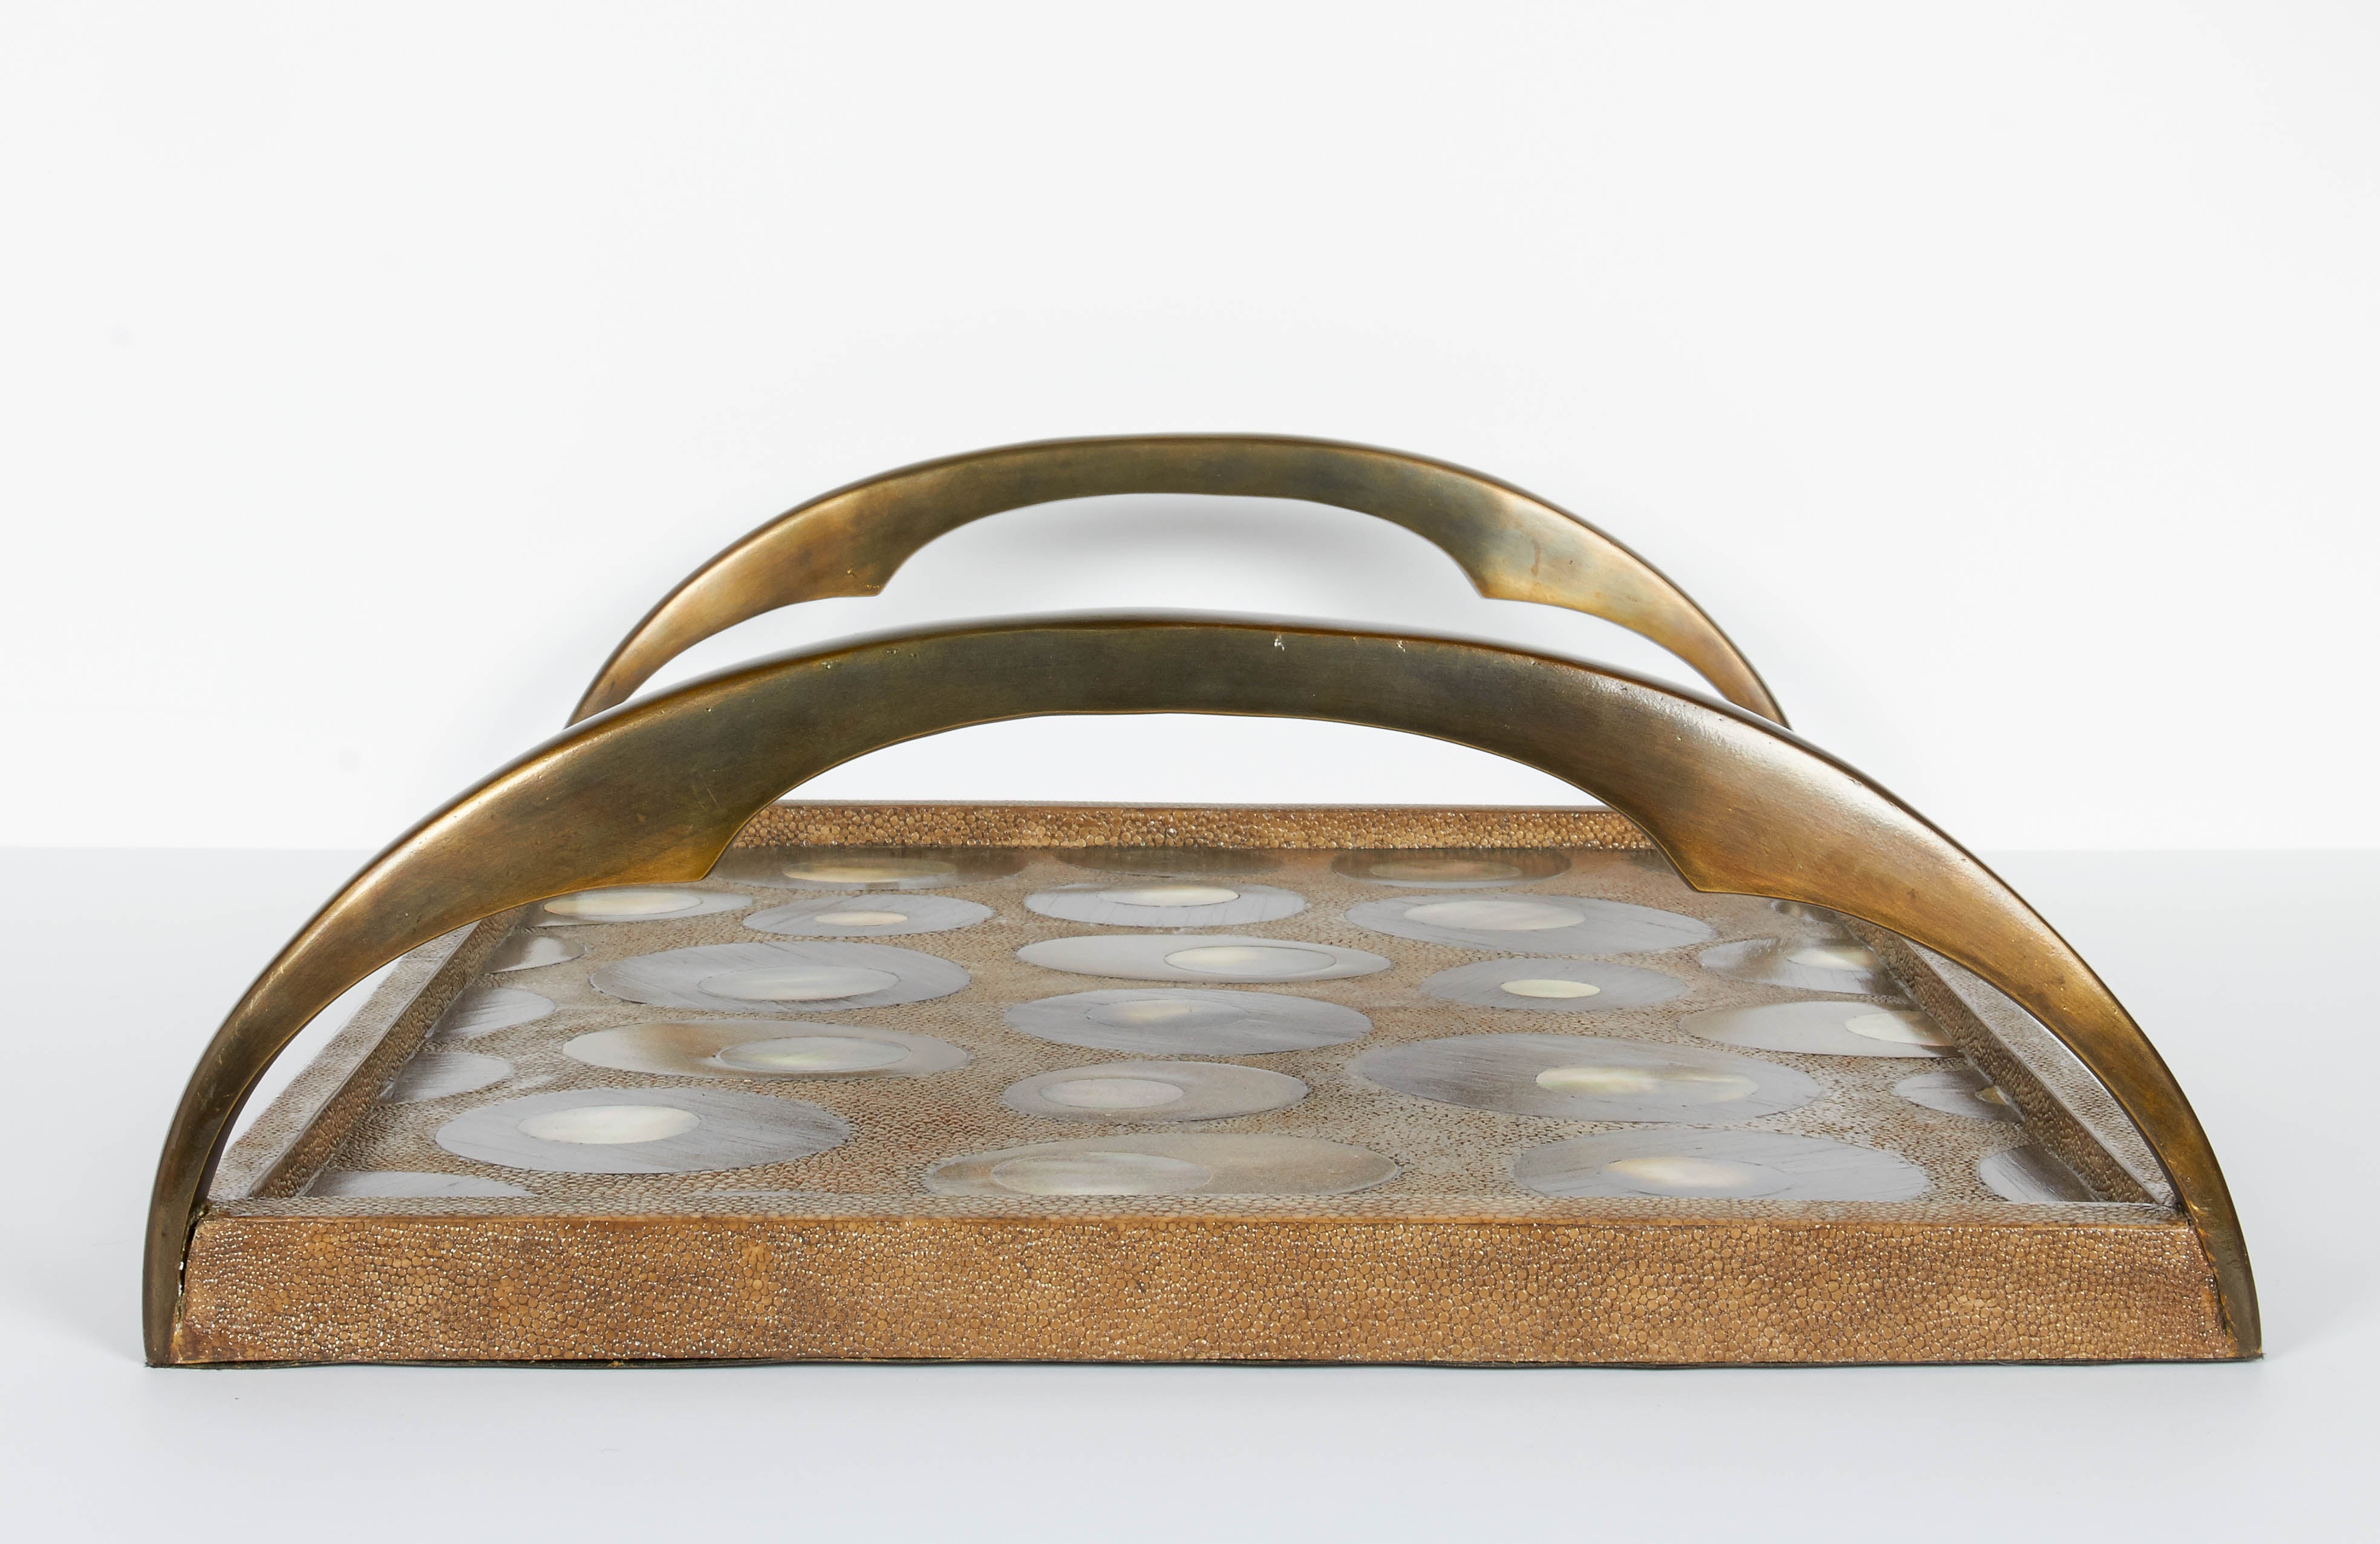 Forged Organic Modern Shagreen Tray with Mother of Pearl Inlays and Bronze Hardware